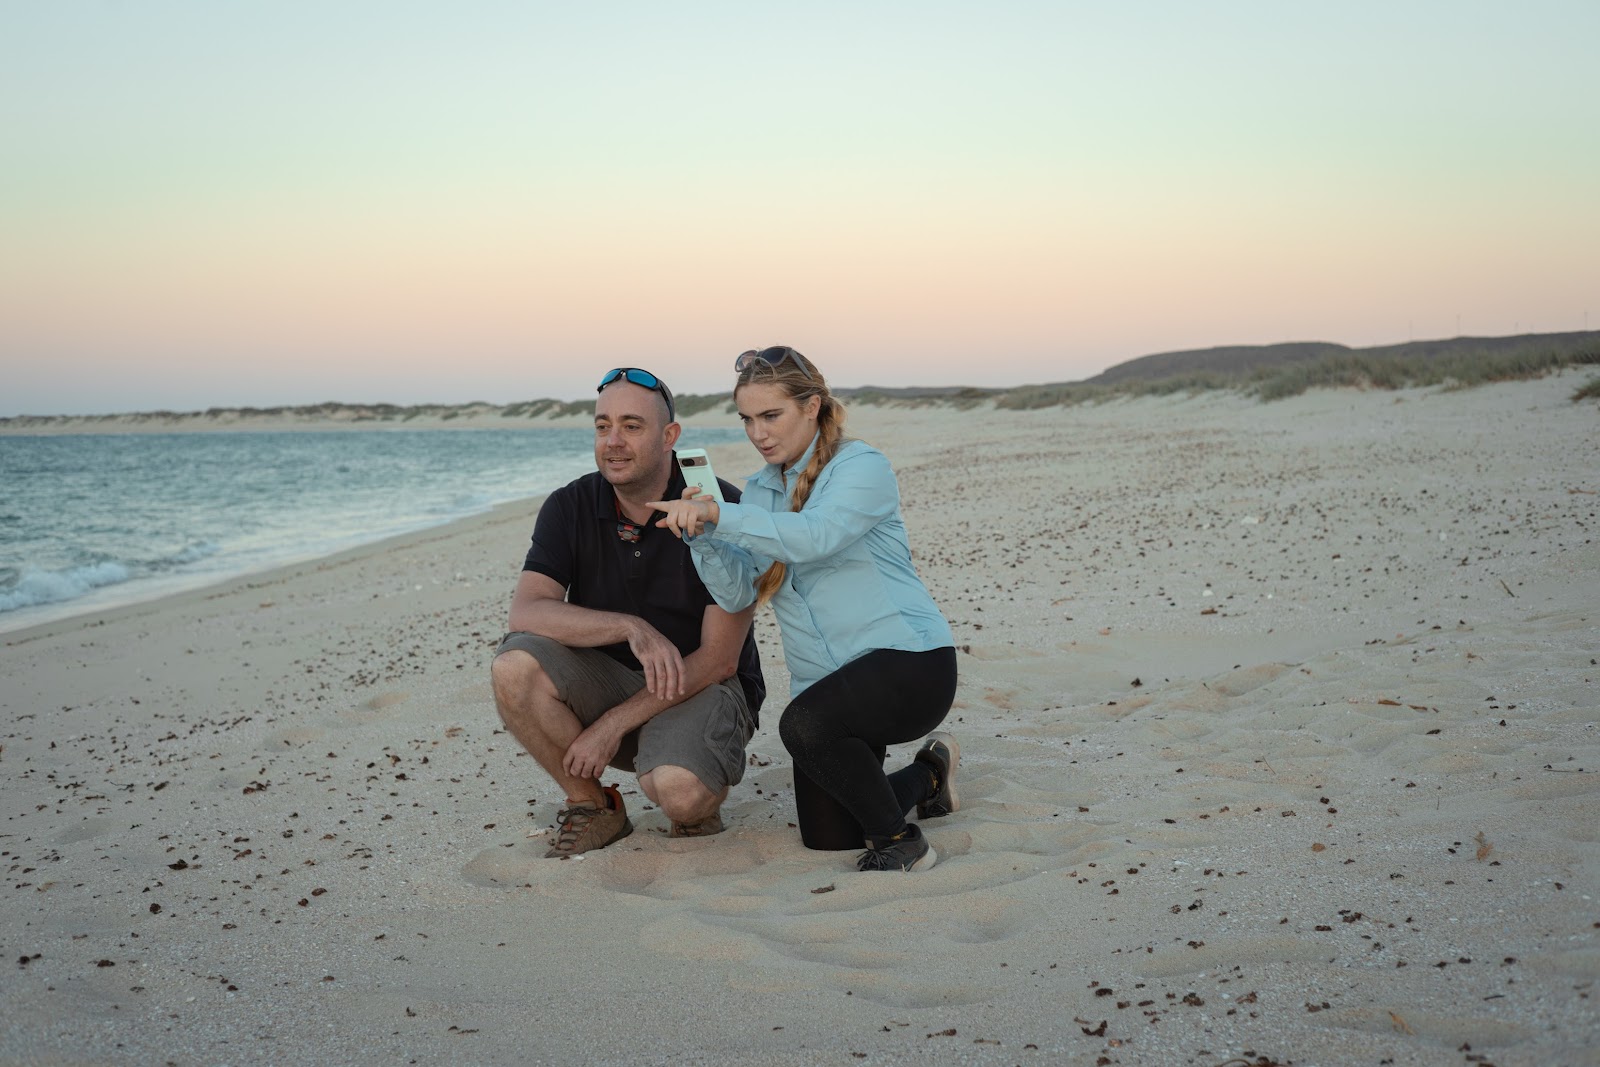 Photo pf Caitlin and Nicolas on the bach in Australia at sunset. Both are kneeling in the sand. Caitlin is using her phone to identify something in the distance, and gesturing to Nicolas who is looking in the same direction